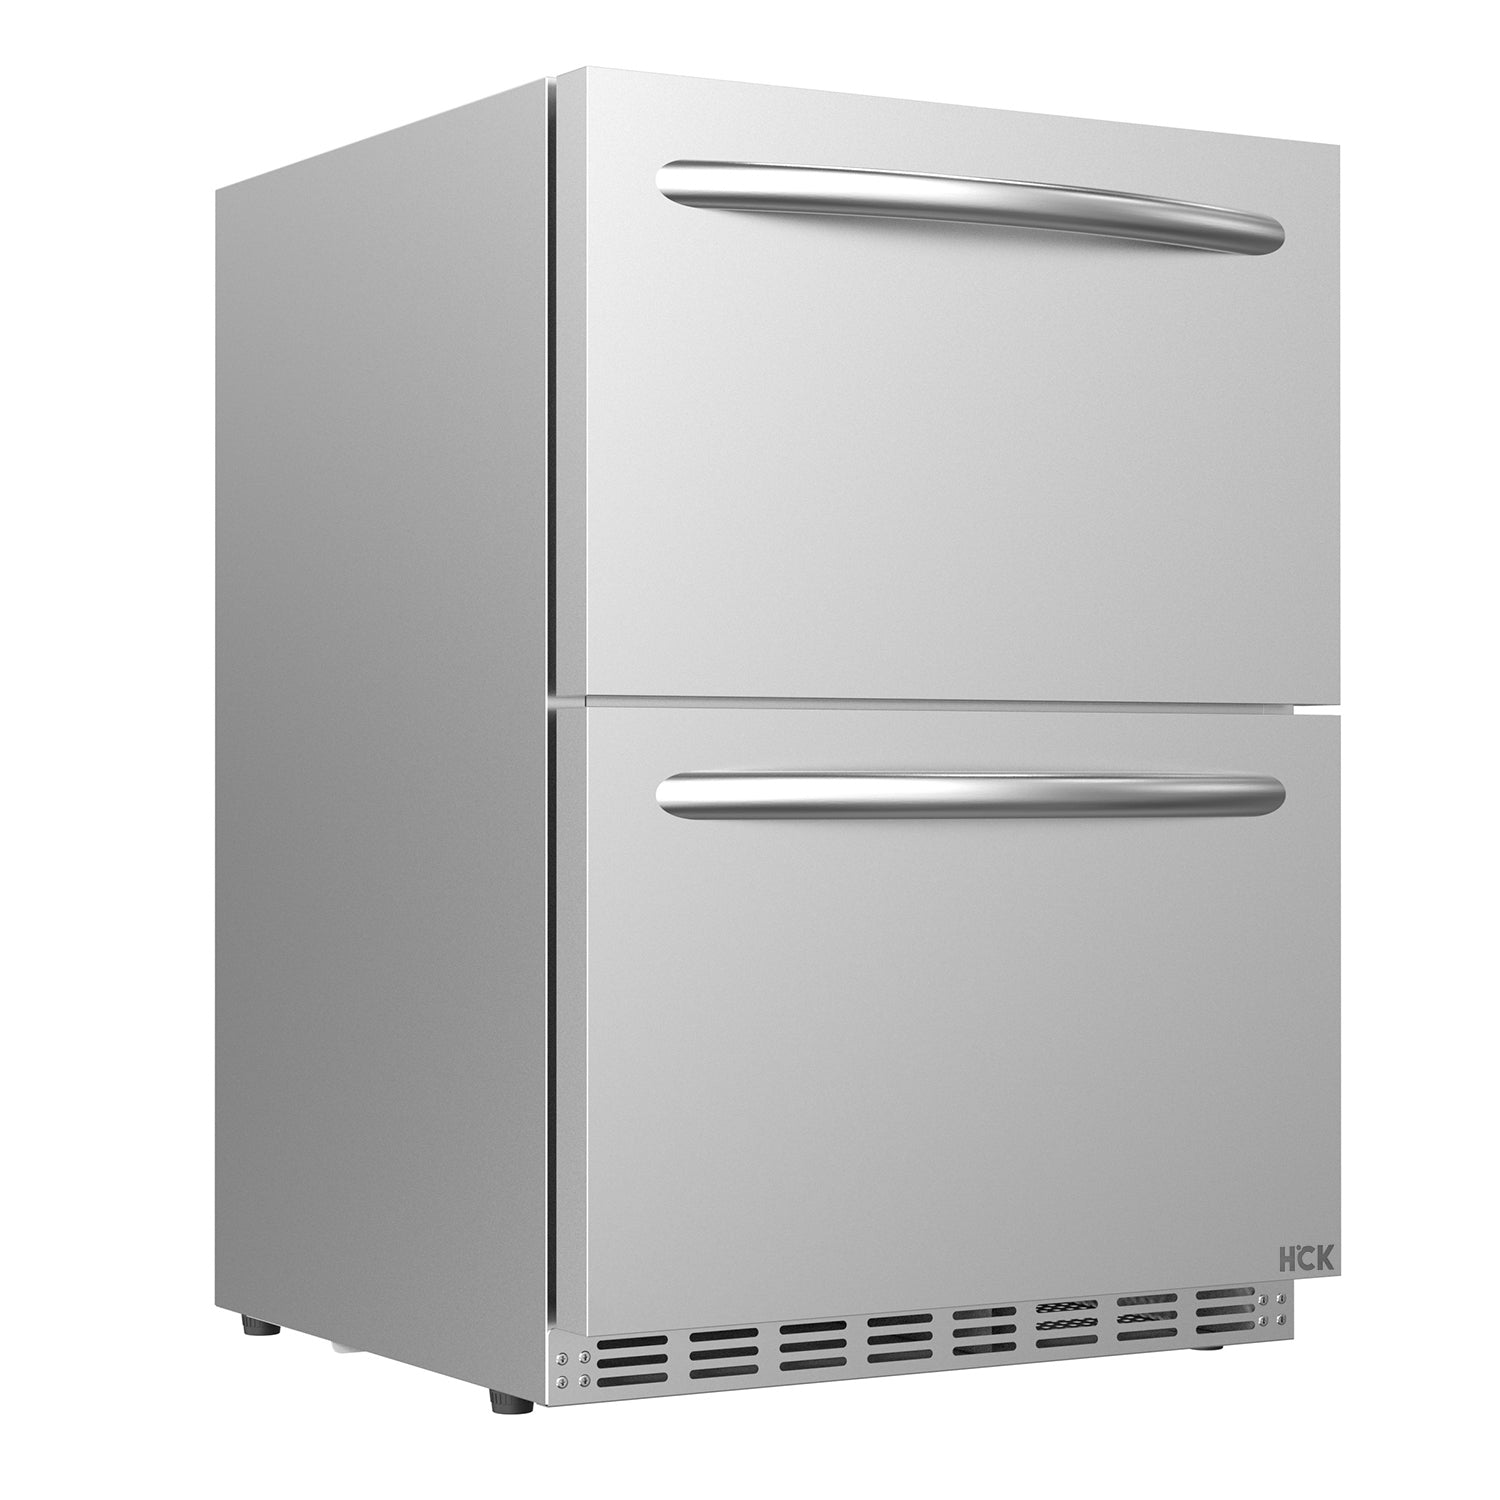 HCK Undercounter Refrigerator 24 Inch,5.1 Cu.ft.Reach-in Double Drawer &  Dual Zone Indoor/Outdoor Stainless Steel Beverage Fridge Cooler for Home  and